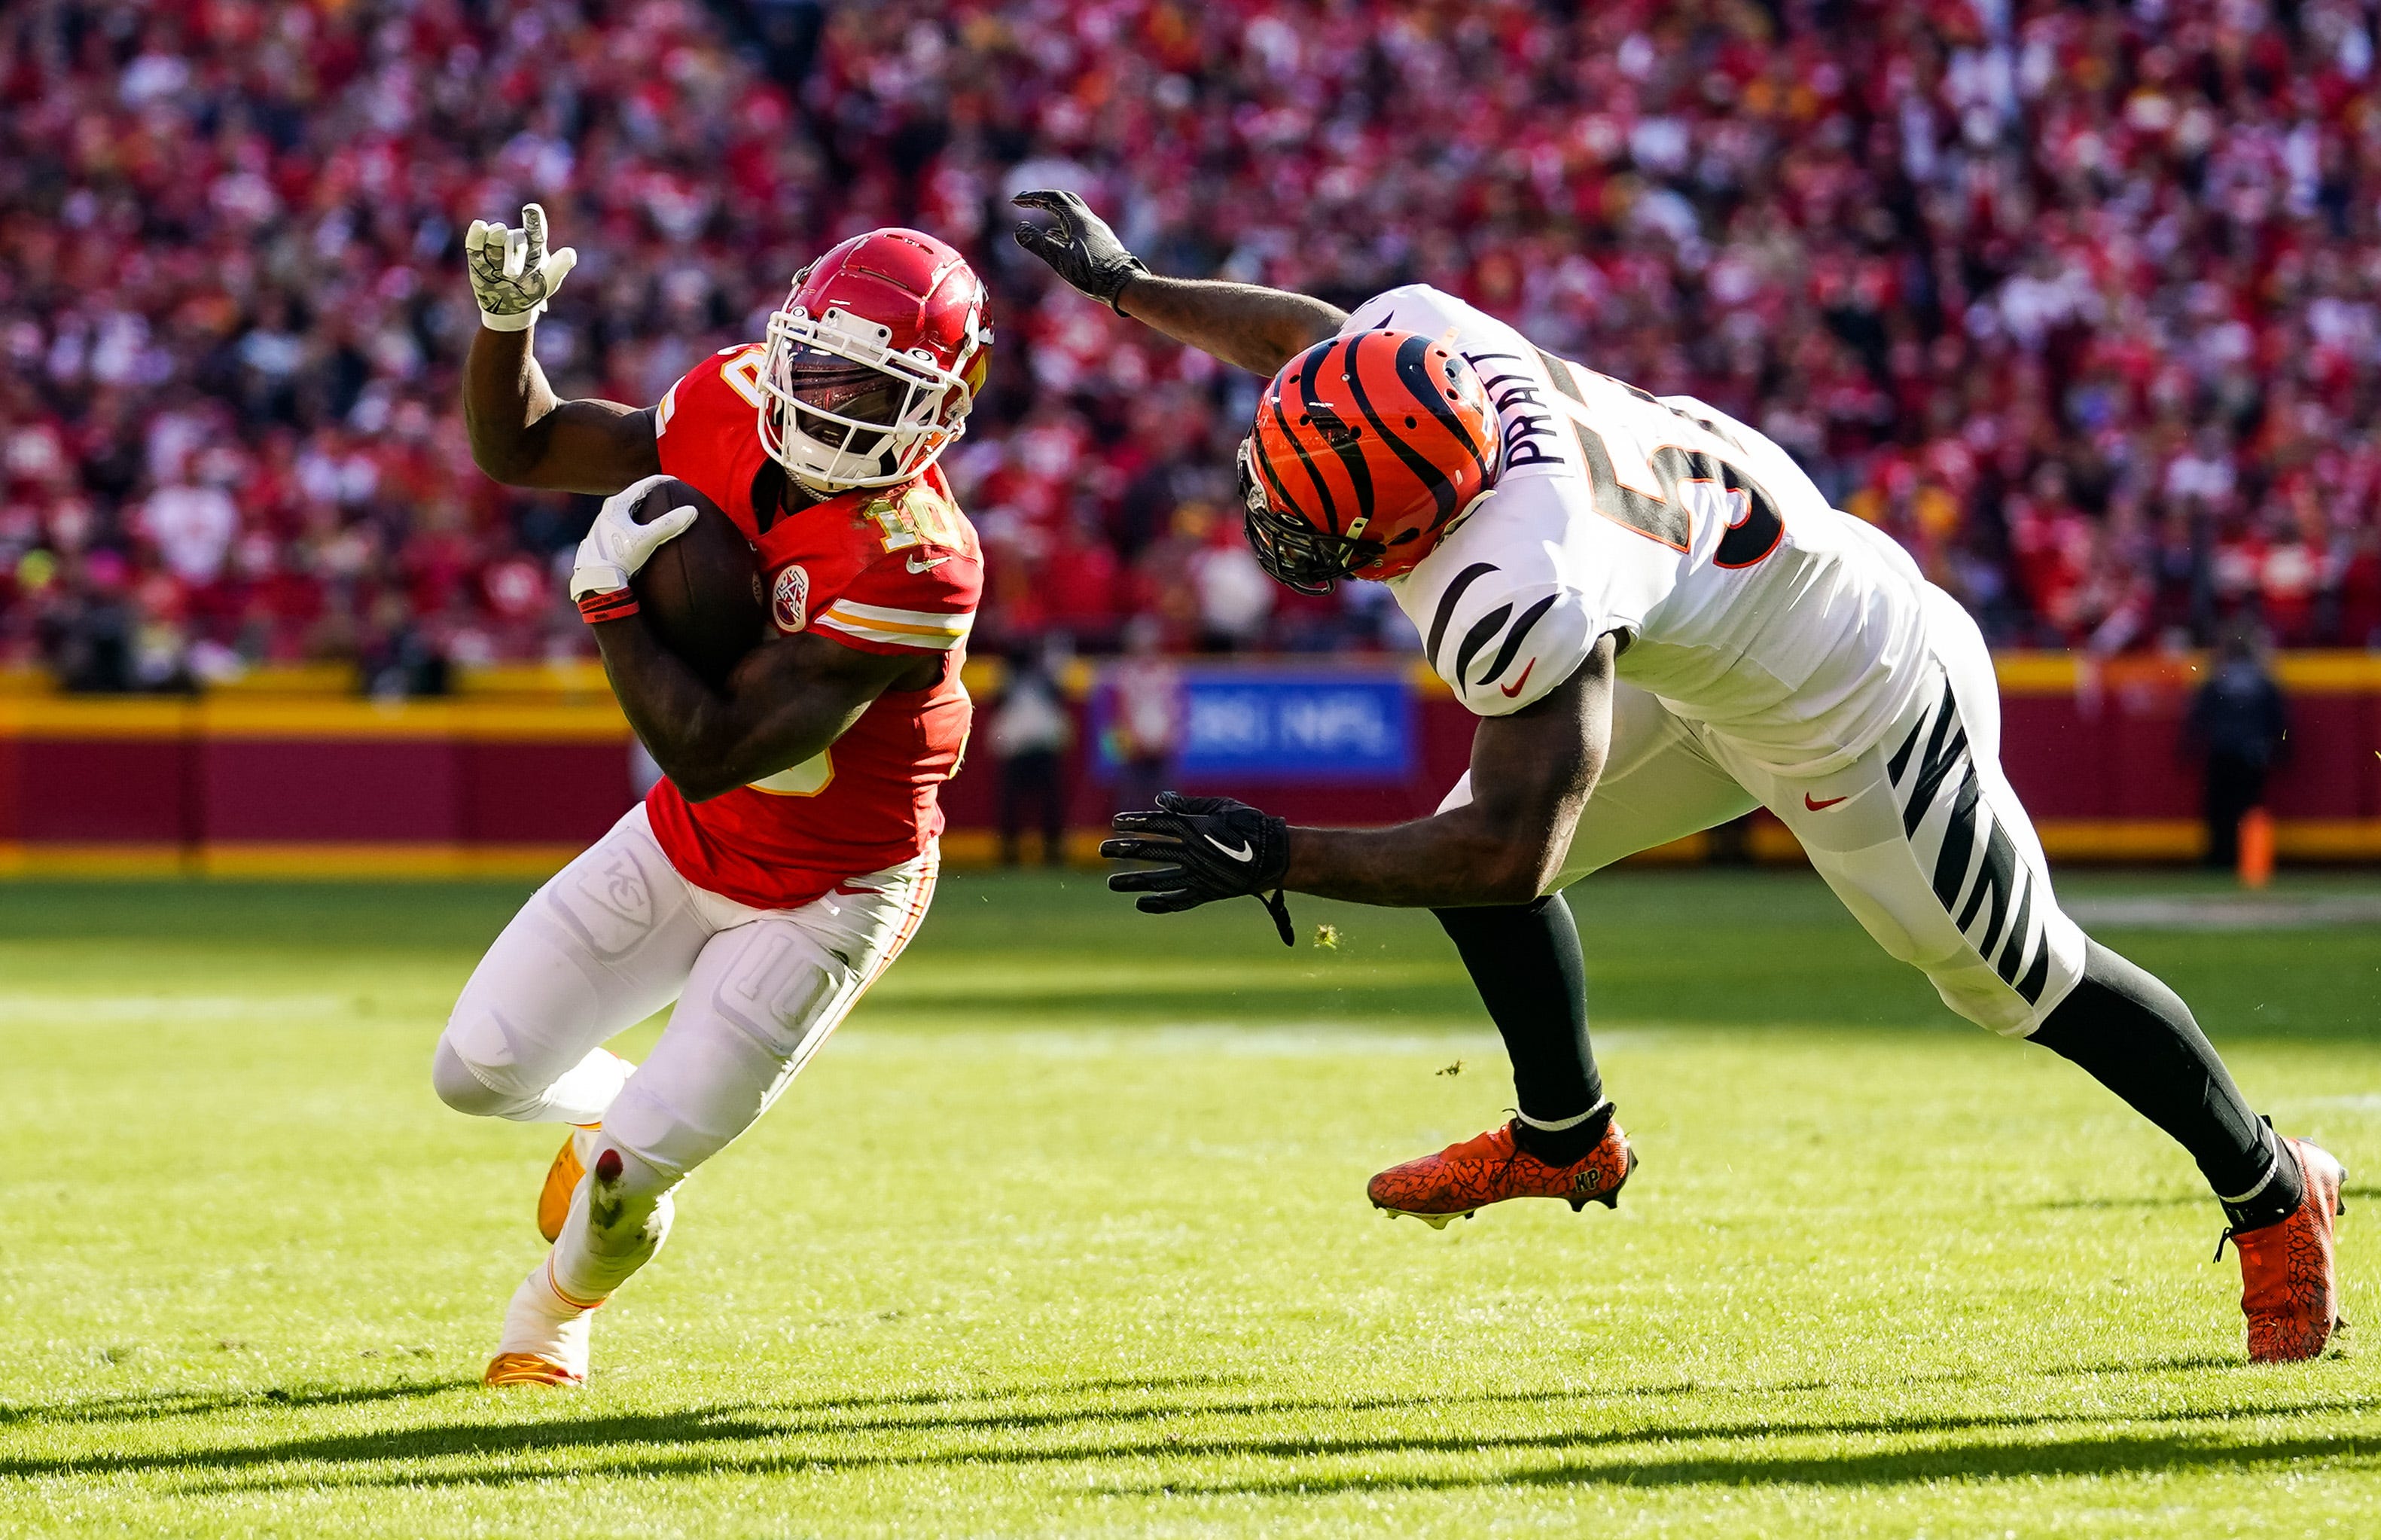 WR Tyreek Hill: Traded to Dolphins (previous team: Chiefs)